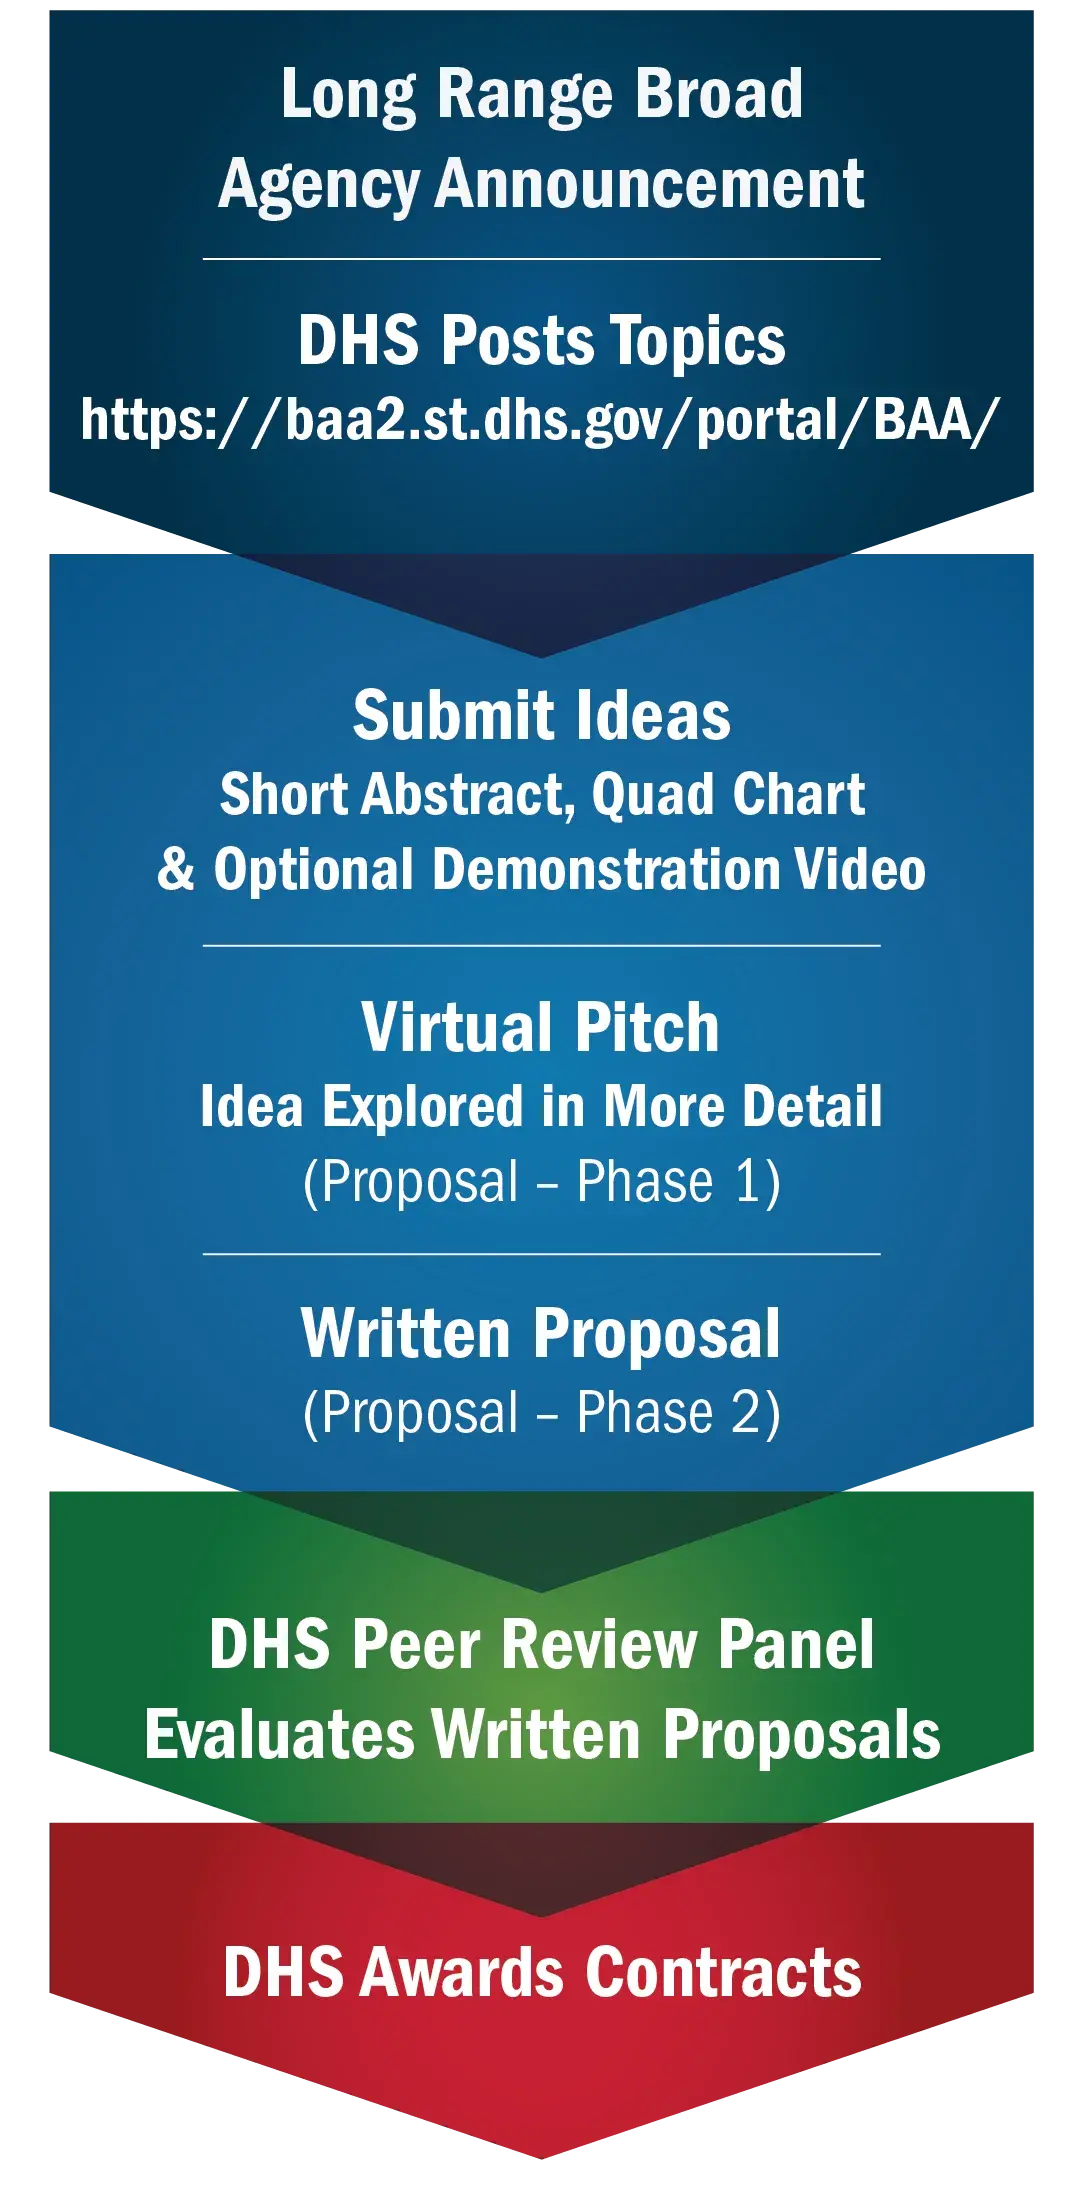 Long Range Broad Agency Announcement process. DHS Posts Topics https://baa2.st.dhs.gov/portal/BAA.  Submit Ideas: Short Abstract, Quad Chart & Optional Demonstration Video. Virtual Pitch: Idea Explored in More Detail (Proposal - Phase 1); Written Proposal (Proposal - Phase 2). DHS Peer Review Panel, Evaluates Written Proposals. DHS Wwards Contracts.